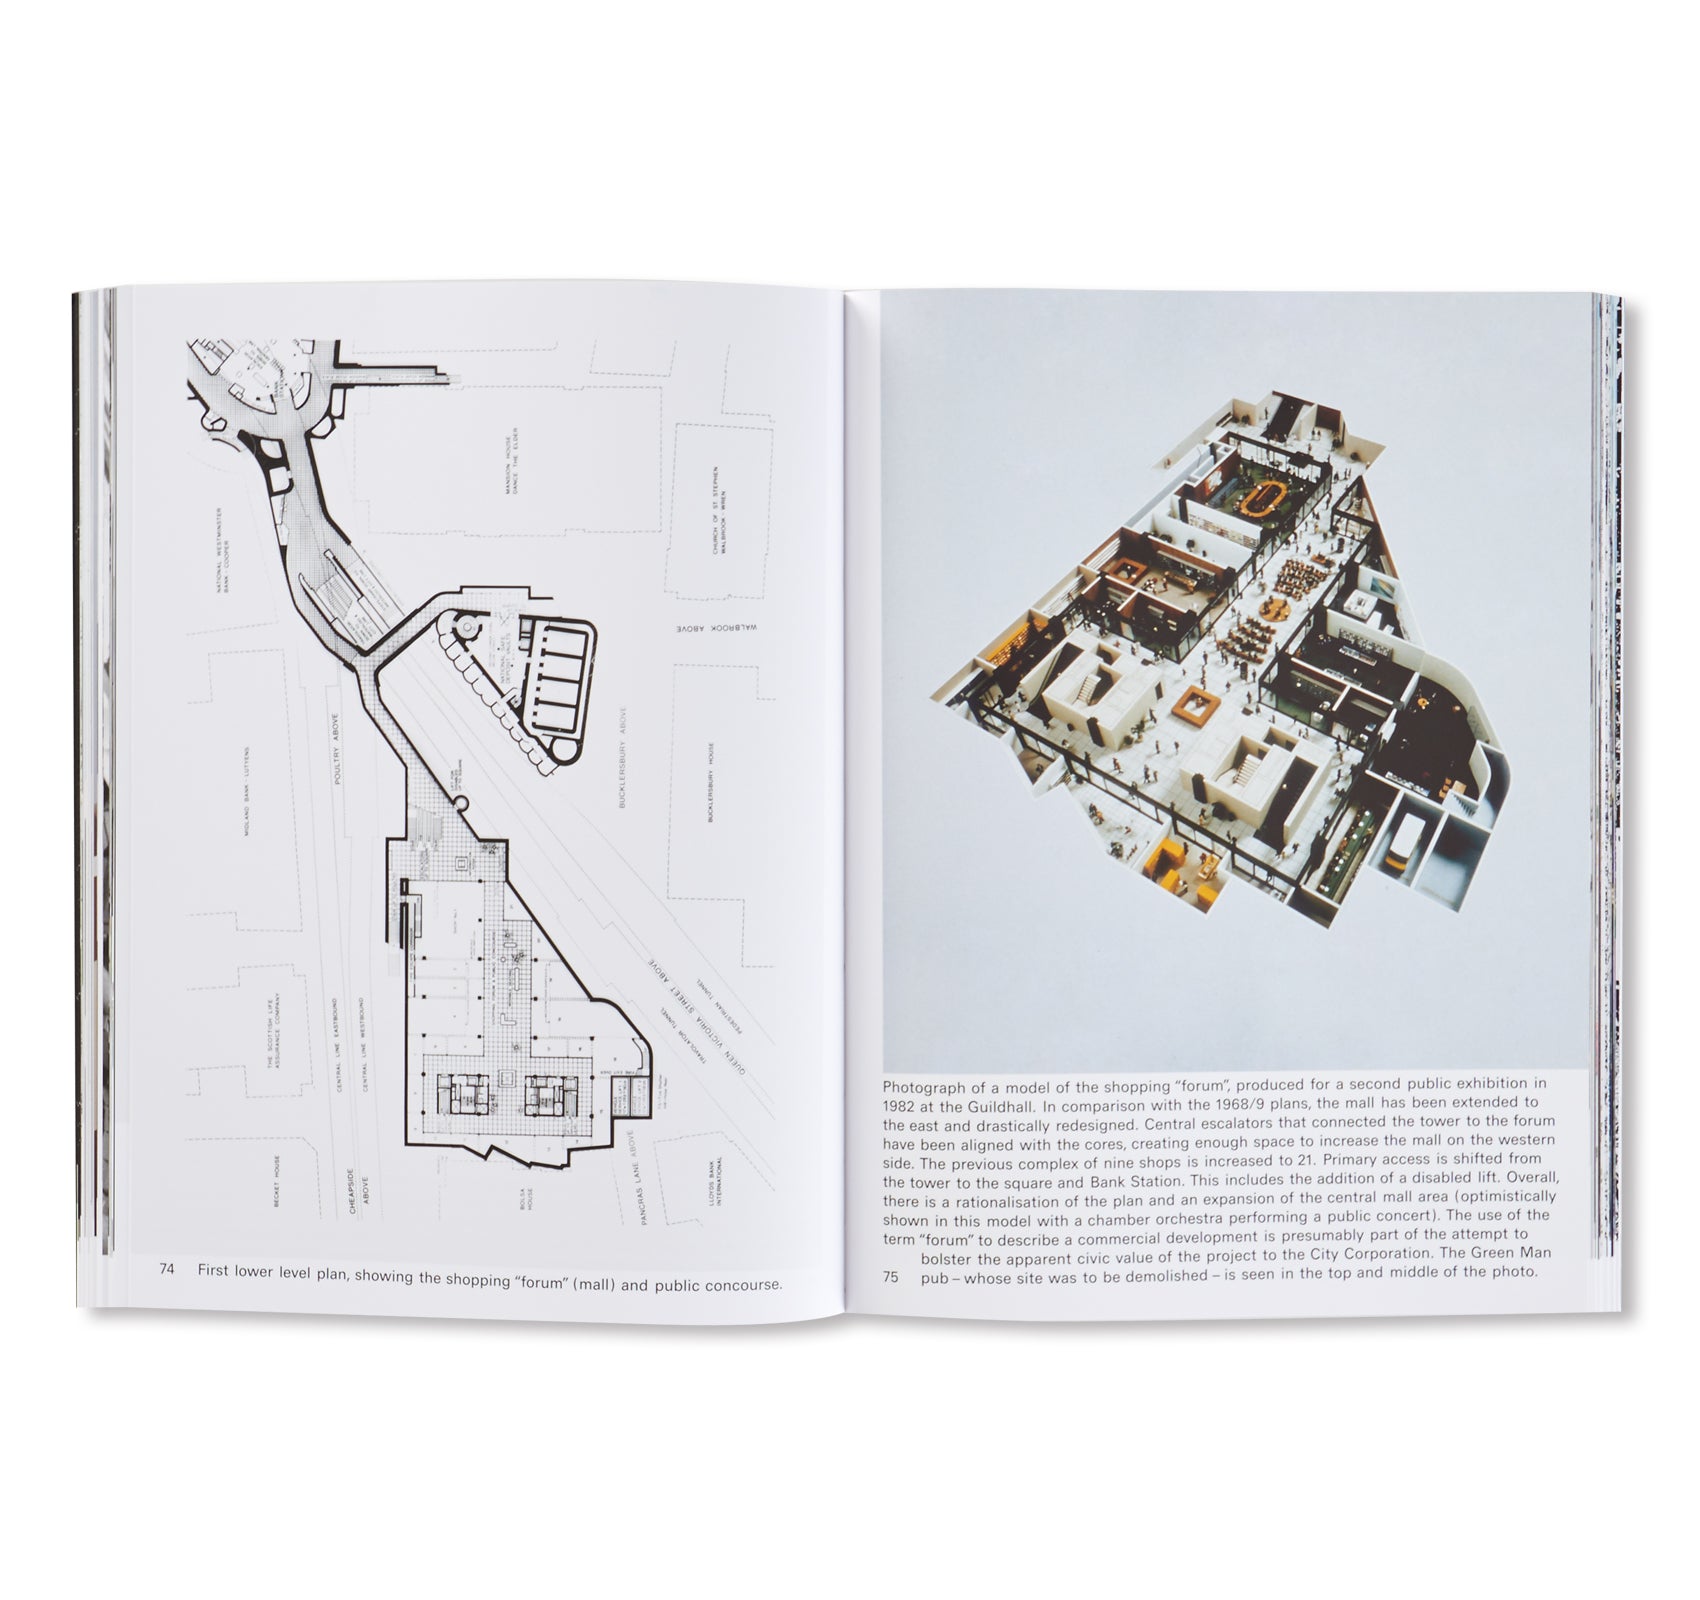 MIES IN LONDON by Mies van der Rohe [HARDCOVER]